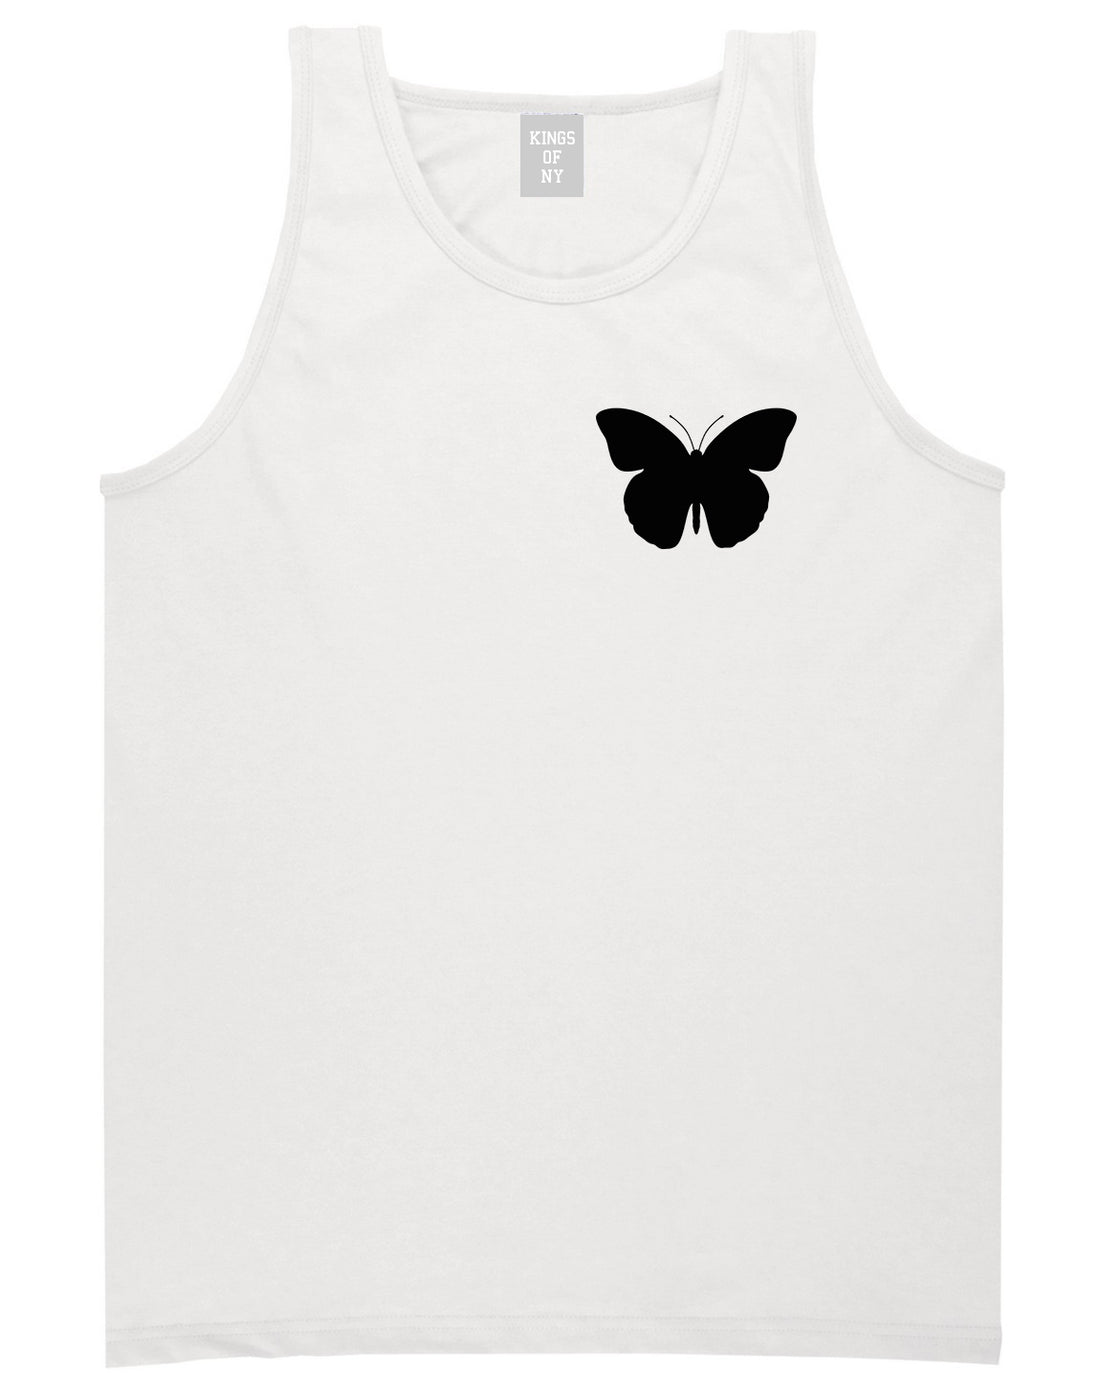 Butterfly Chest White Tank Top Shirt by Kings Of NY